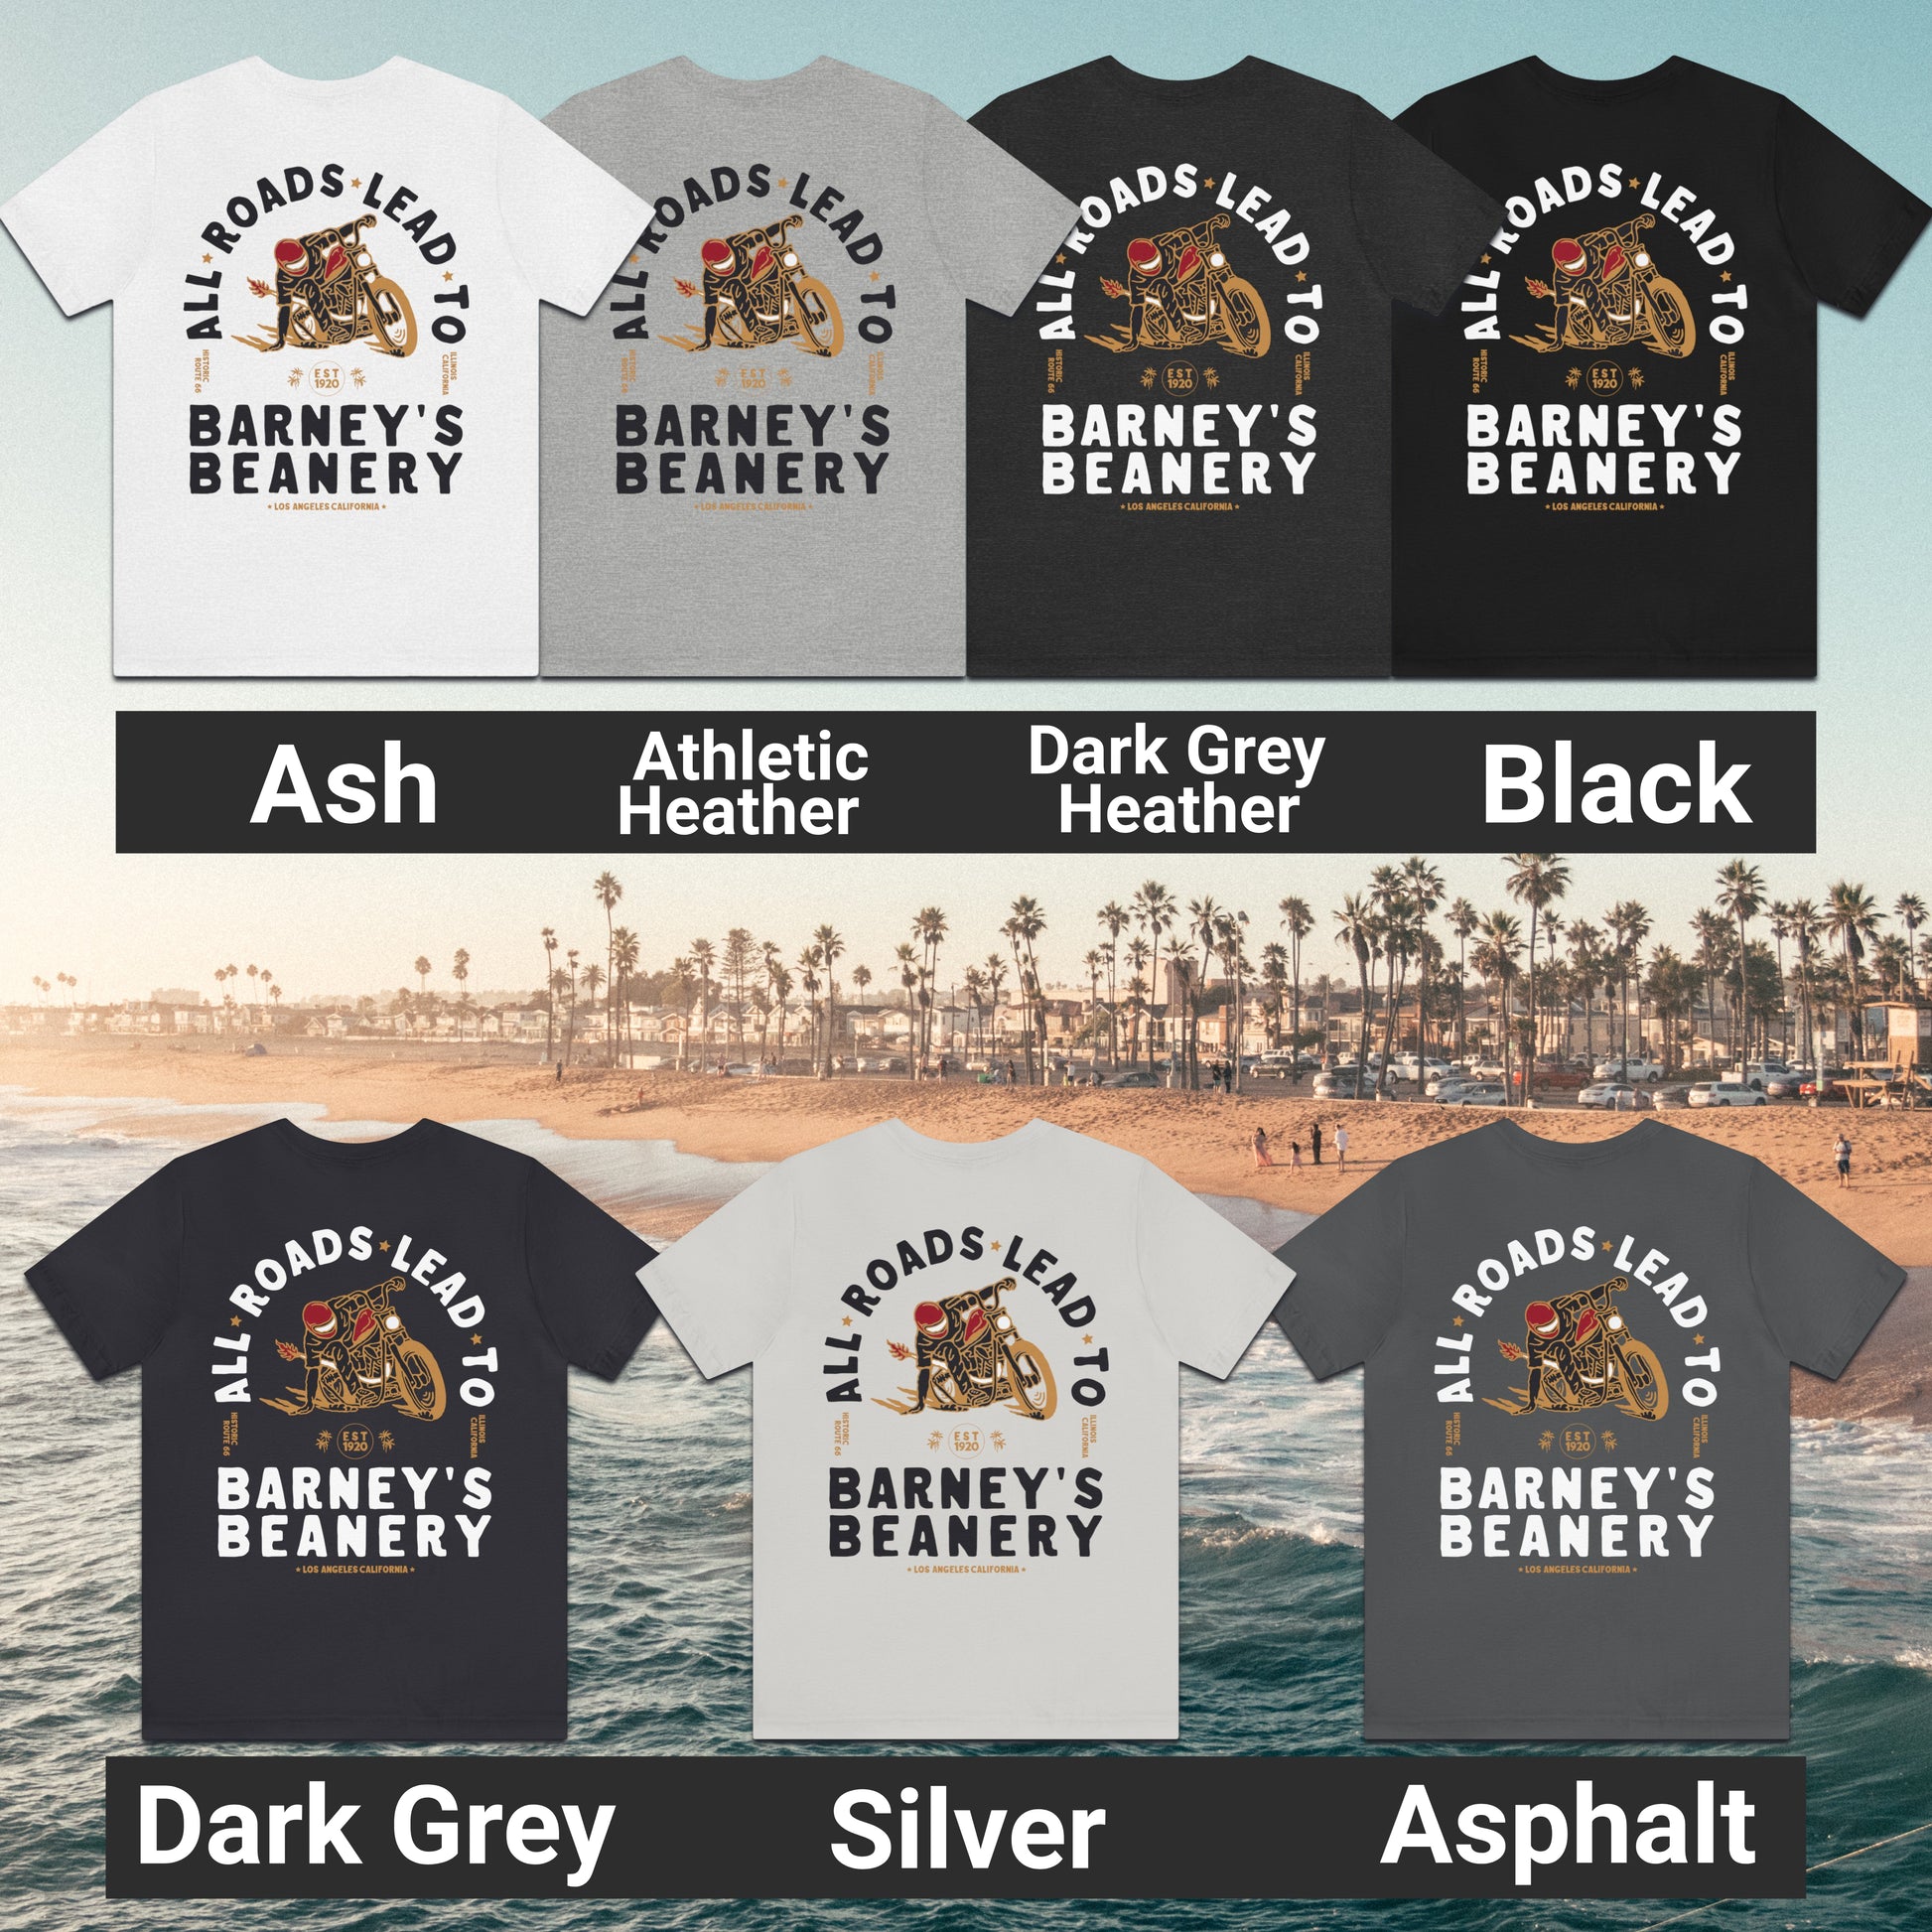 All Roads Lead To | BARNEY'S BEANERY - Women's Graphic Tee | Ash, Athletic Heather, Dark Grey Heather, Black, Dark Grey, Silver, Asphalt Bella+Canvas 3001 T-Shirts - Motorcycle Graphic On Back Flat Lay View